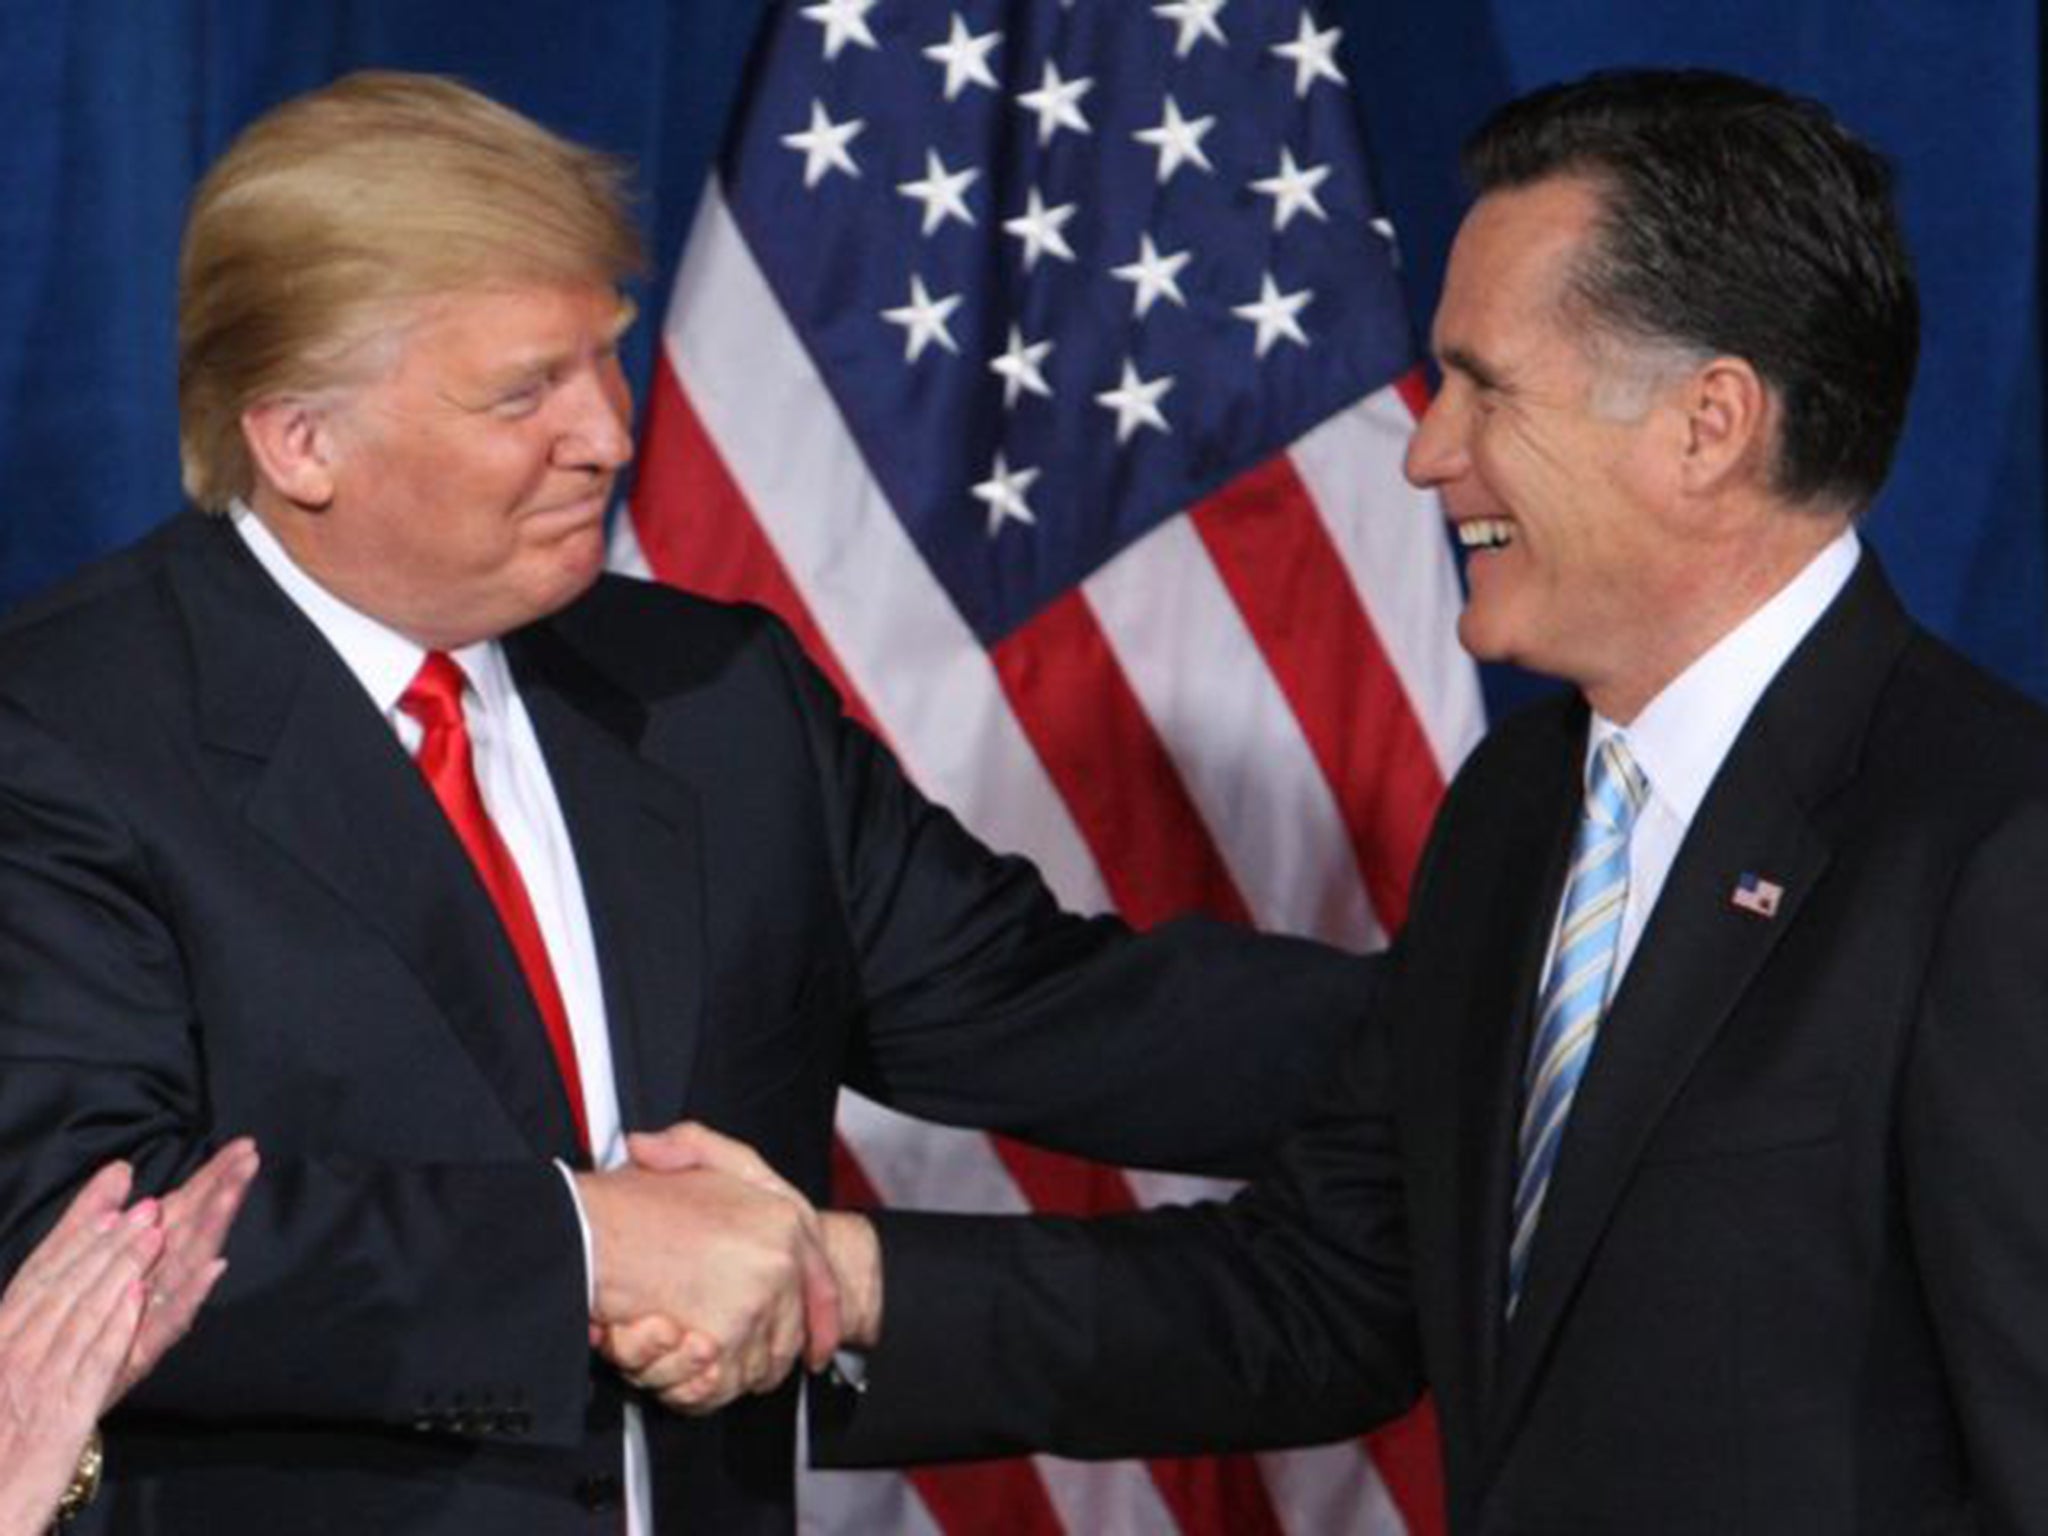 Trump greets Romney after endorsing his candidacy for president at the Trump Hotel in Las Vegas in February 2012